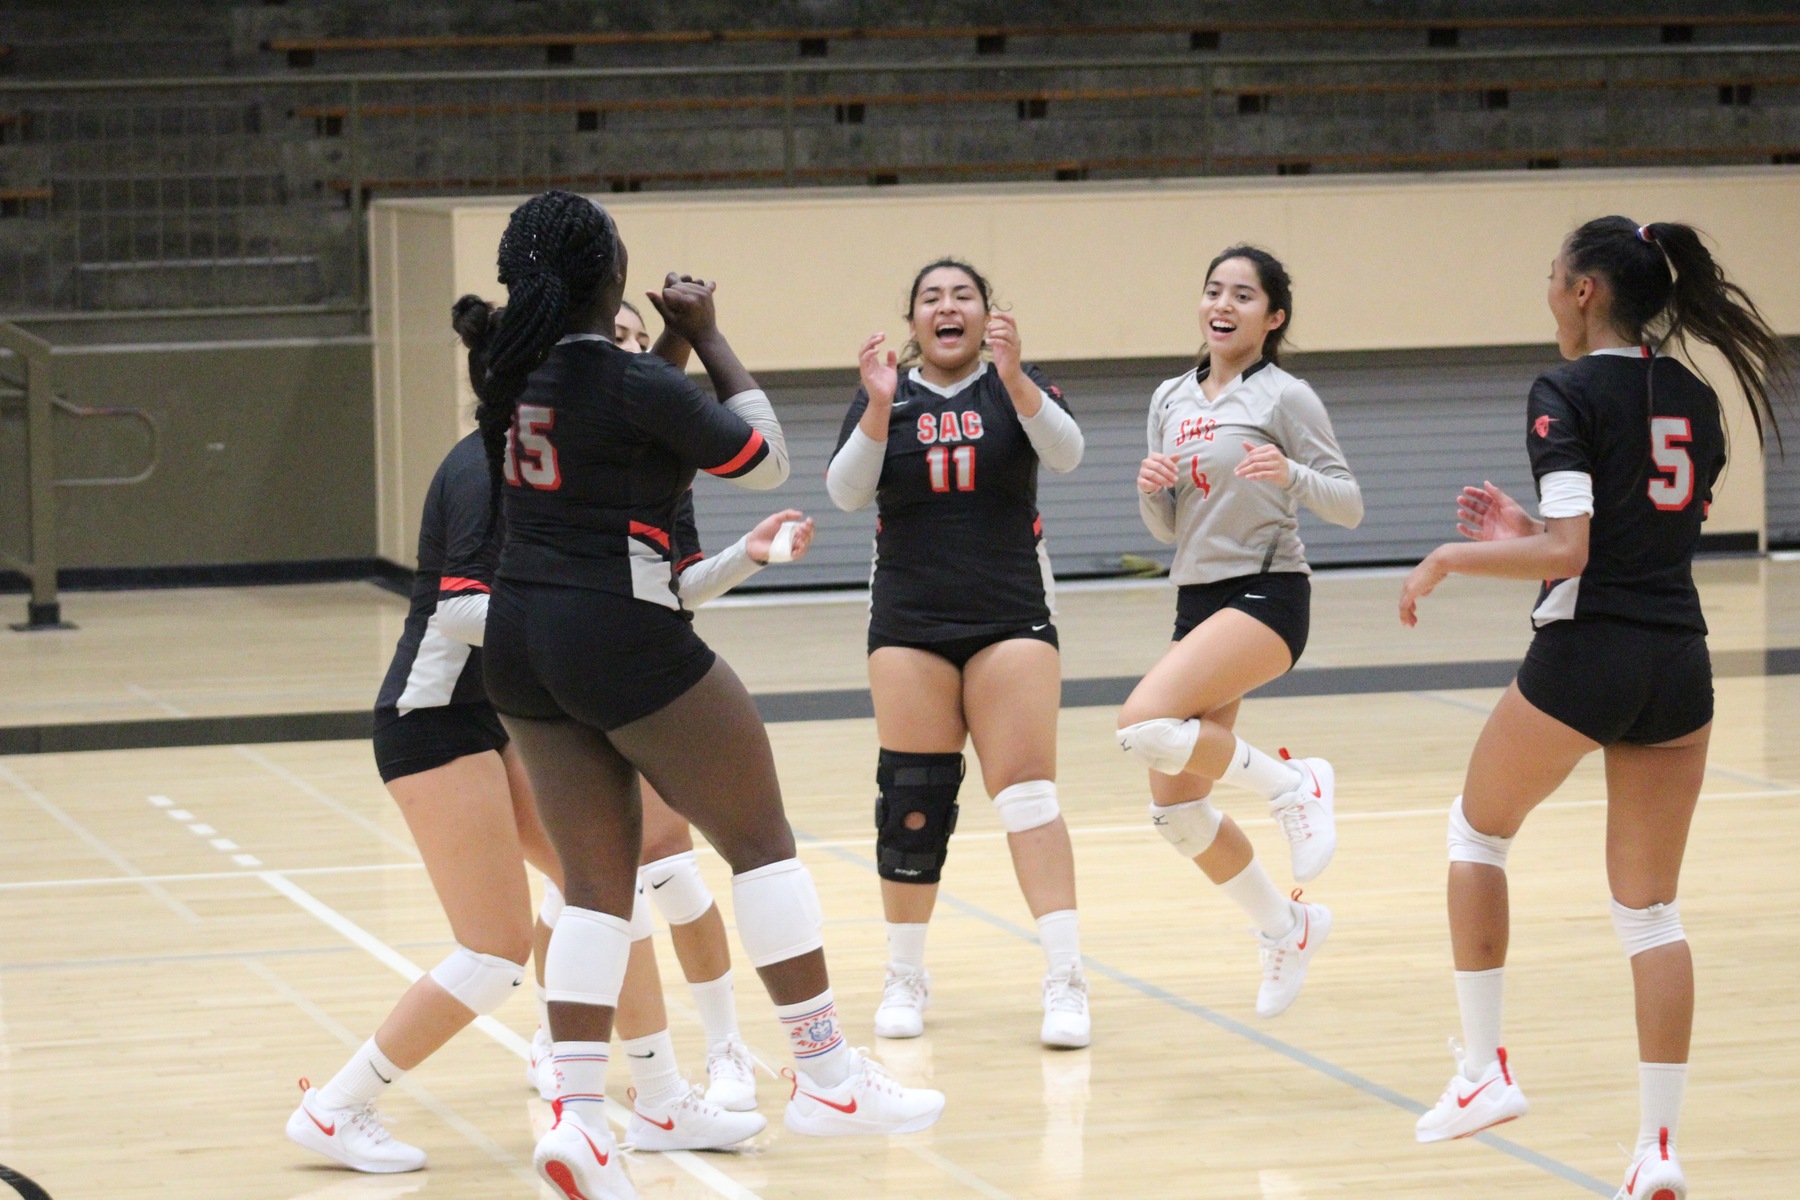 Dons Sweep Southwestern 3-0 for First Win